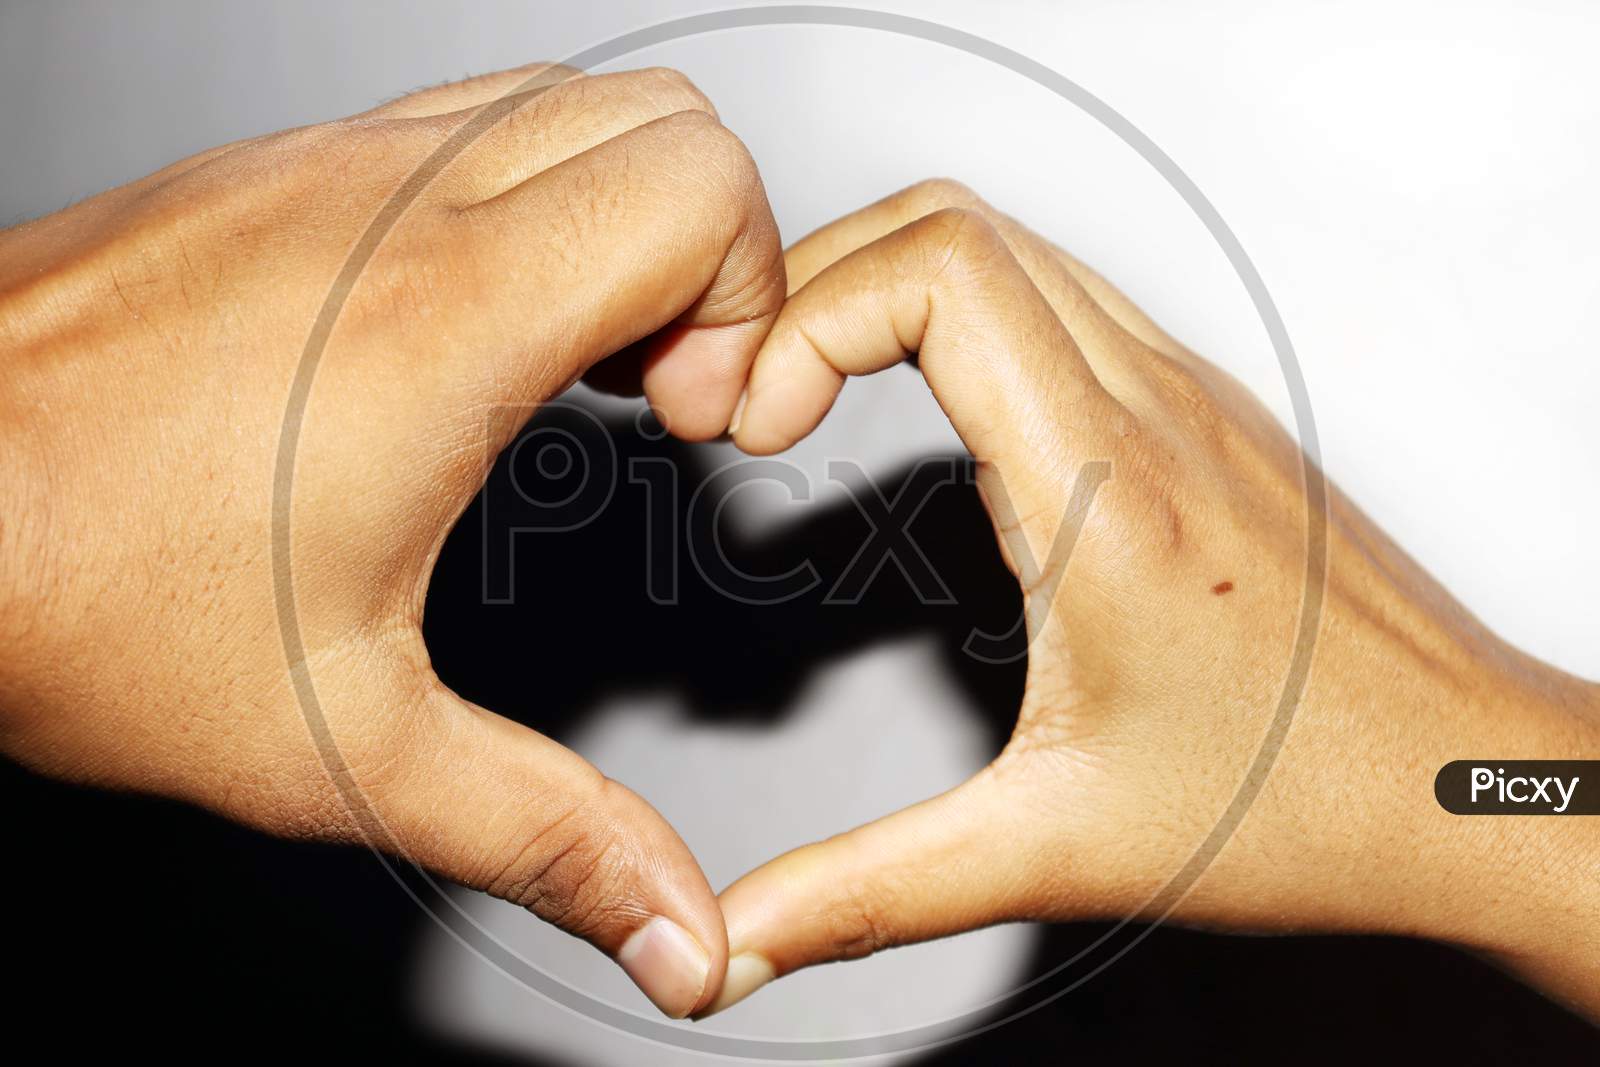 A Boy And Girl Making Heart Shape With Both Hand